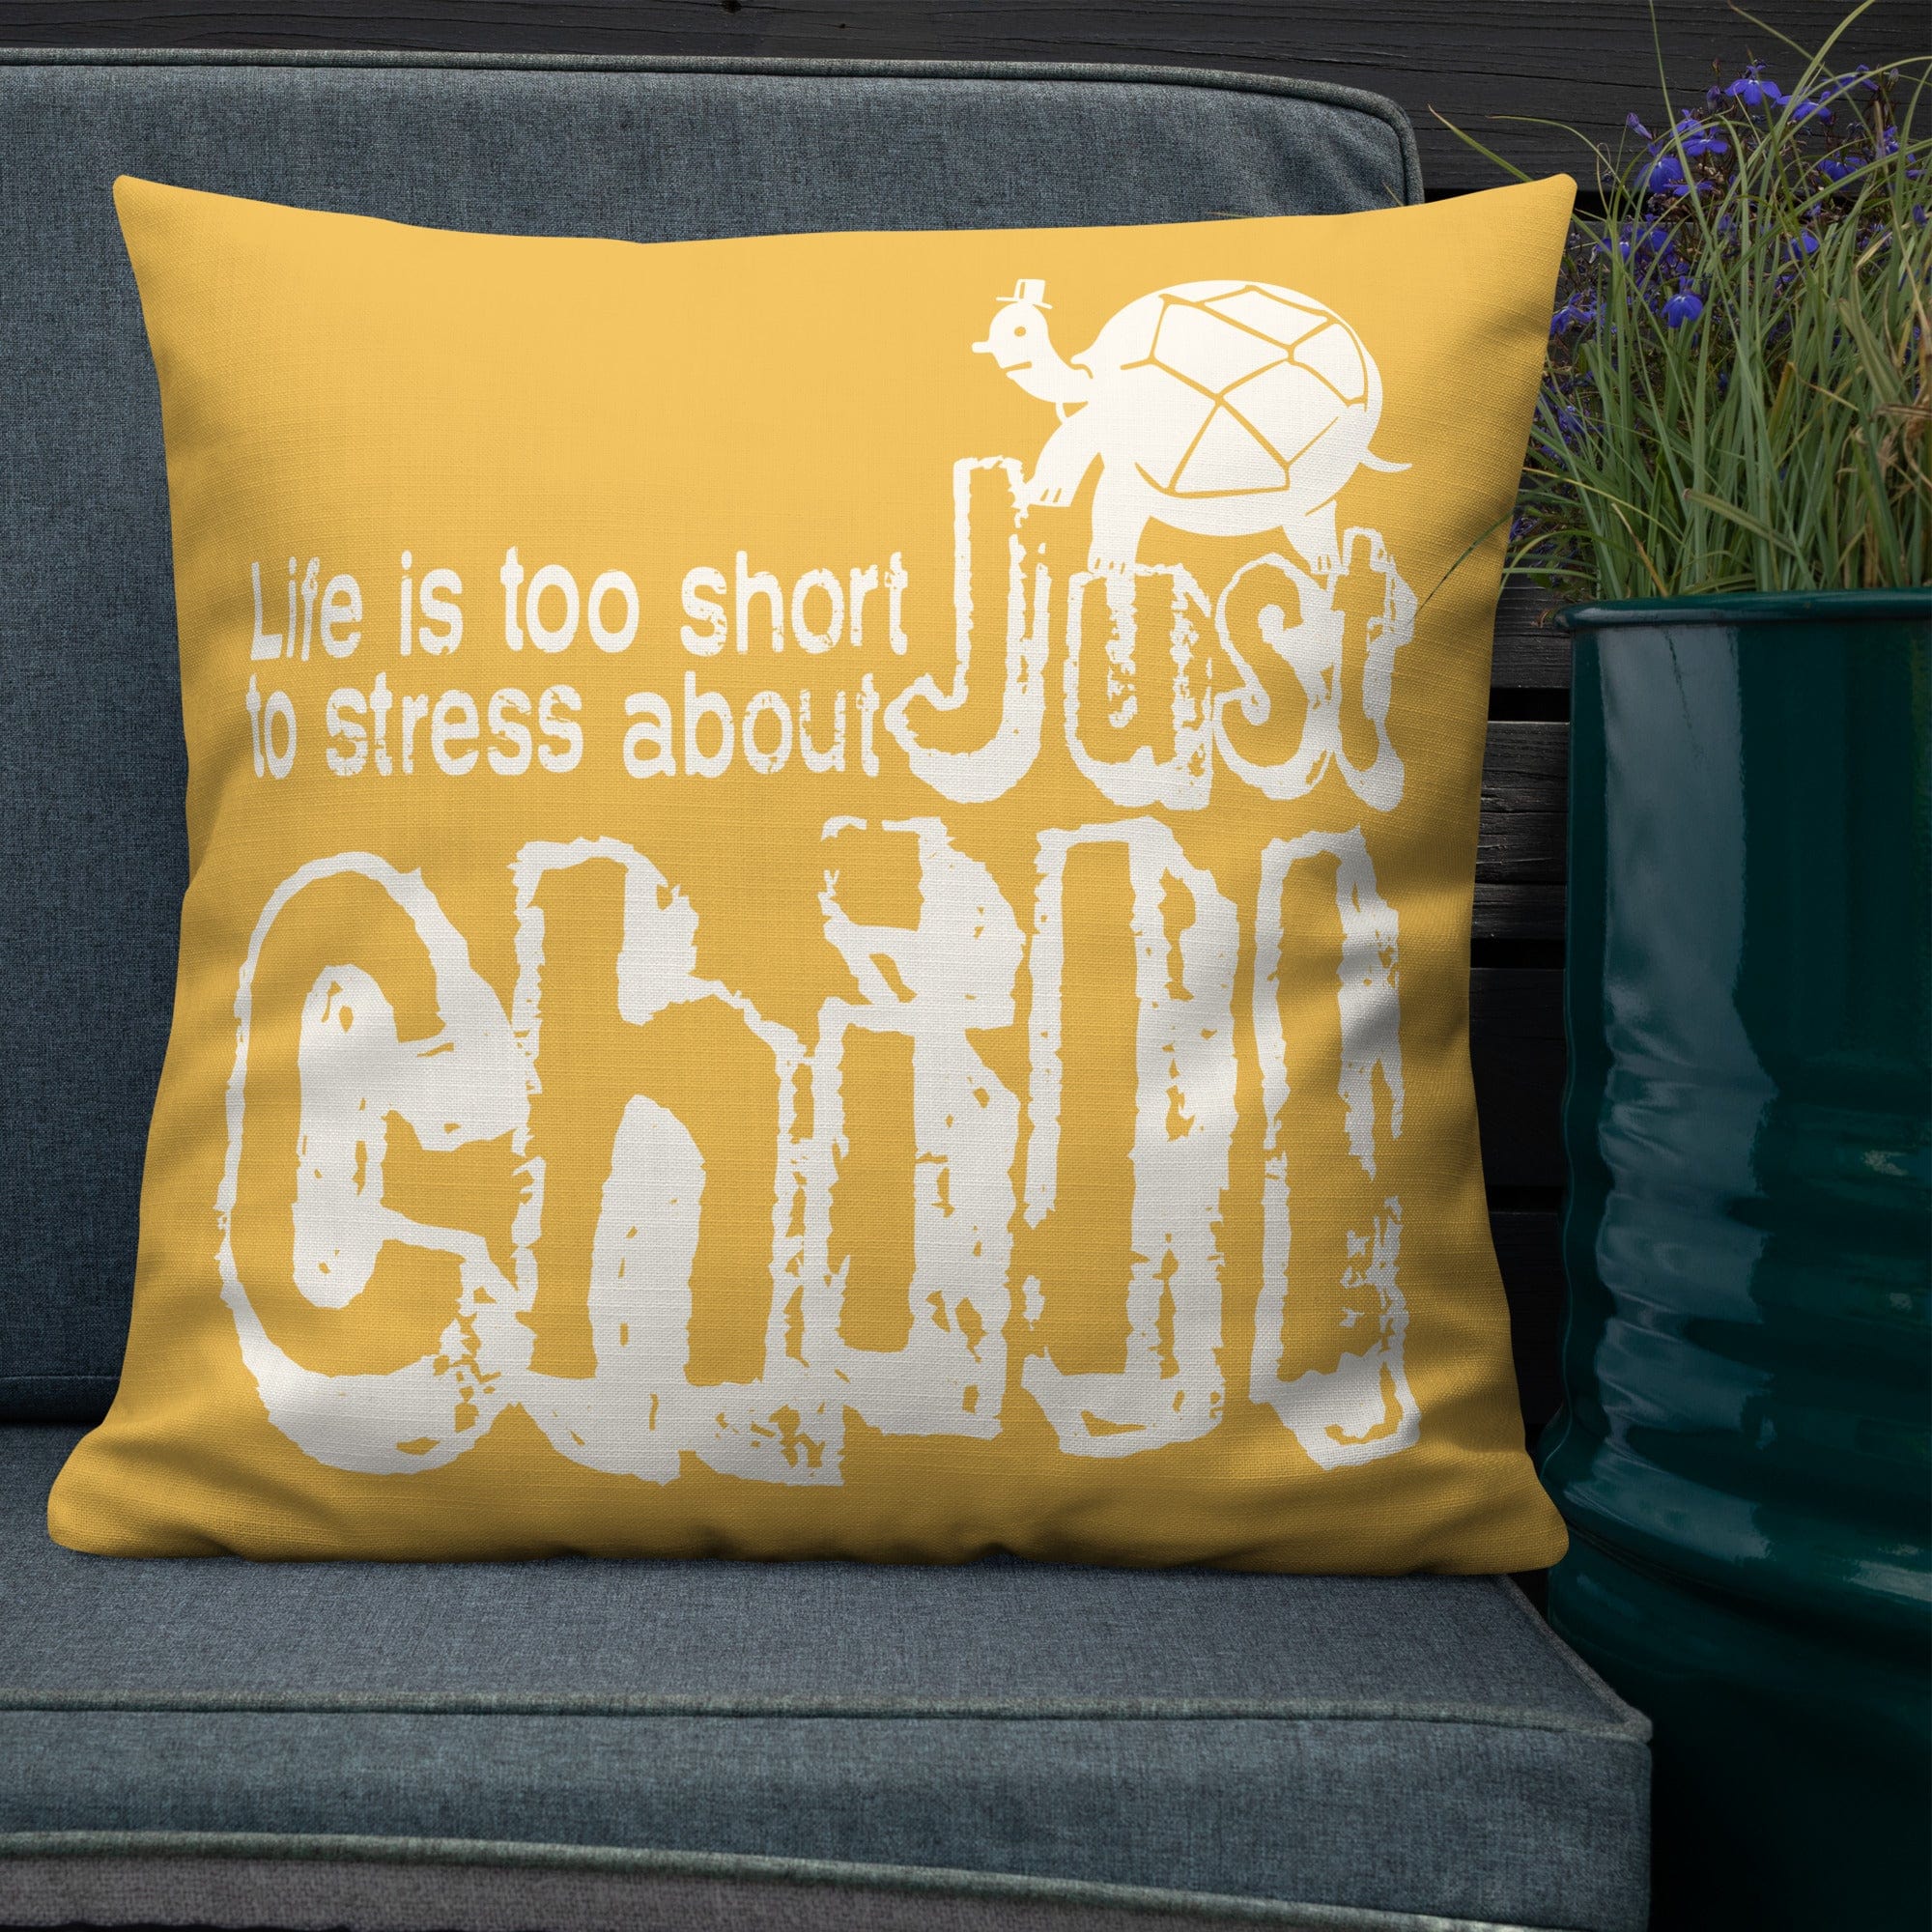 Shop Just Chill Inspirational Quote Decorative Accent Throw Pillow Cushion - Retro Yellow, Throw Pillows, USA Boutique